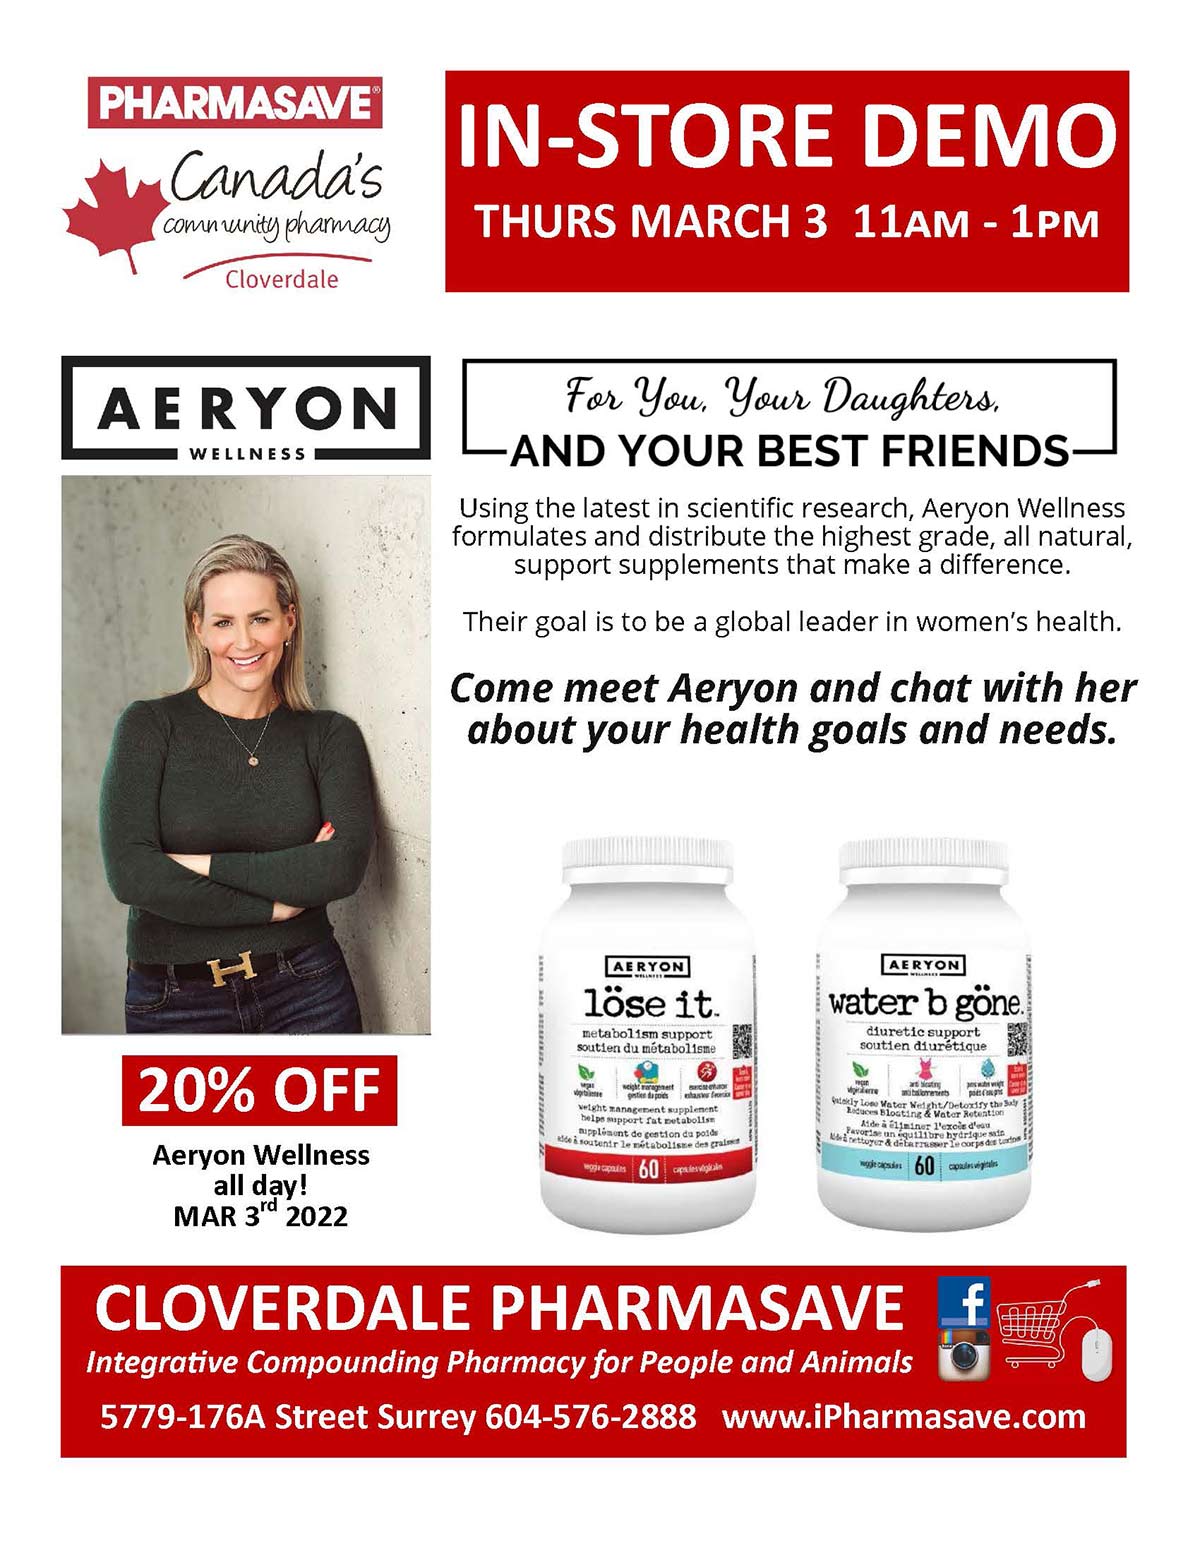 Aeryon Wellness in-store demo Thursday March 3 11am - 1pm